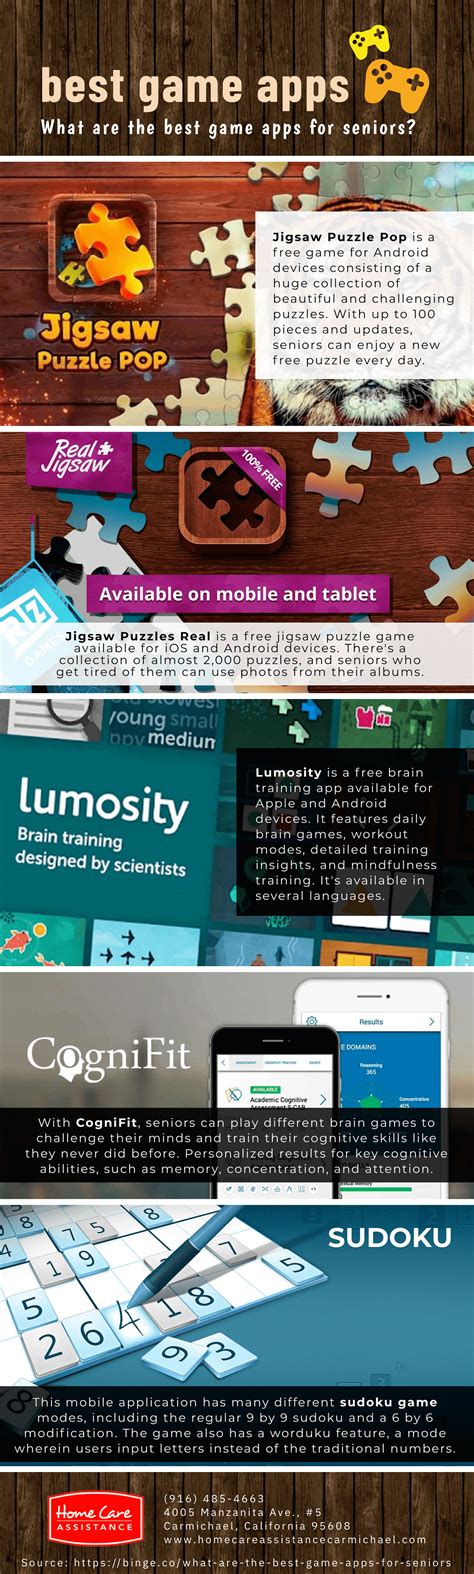 What are the best ipad apps for seniors? What Are the Best Game Apps for Seniors? Infographic